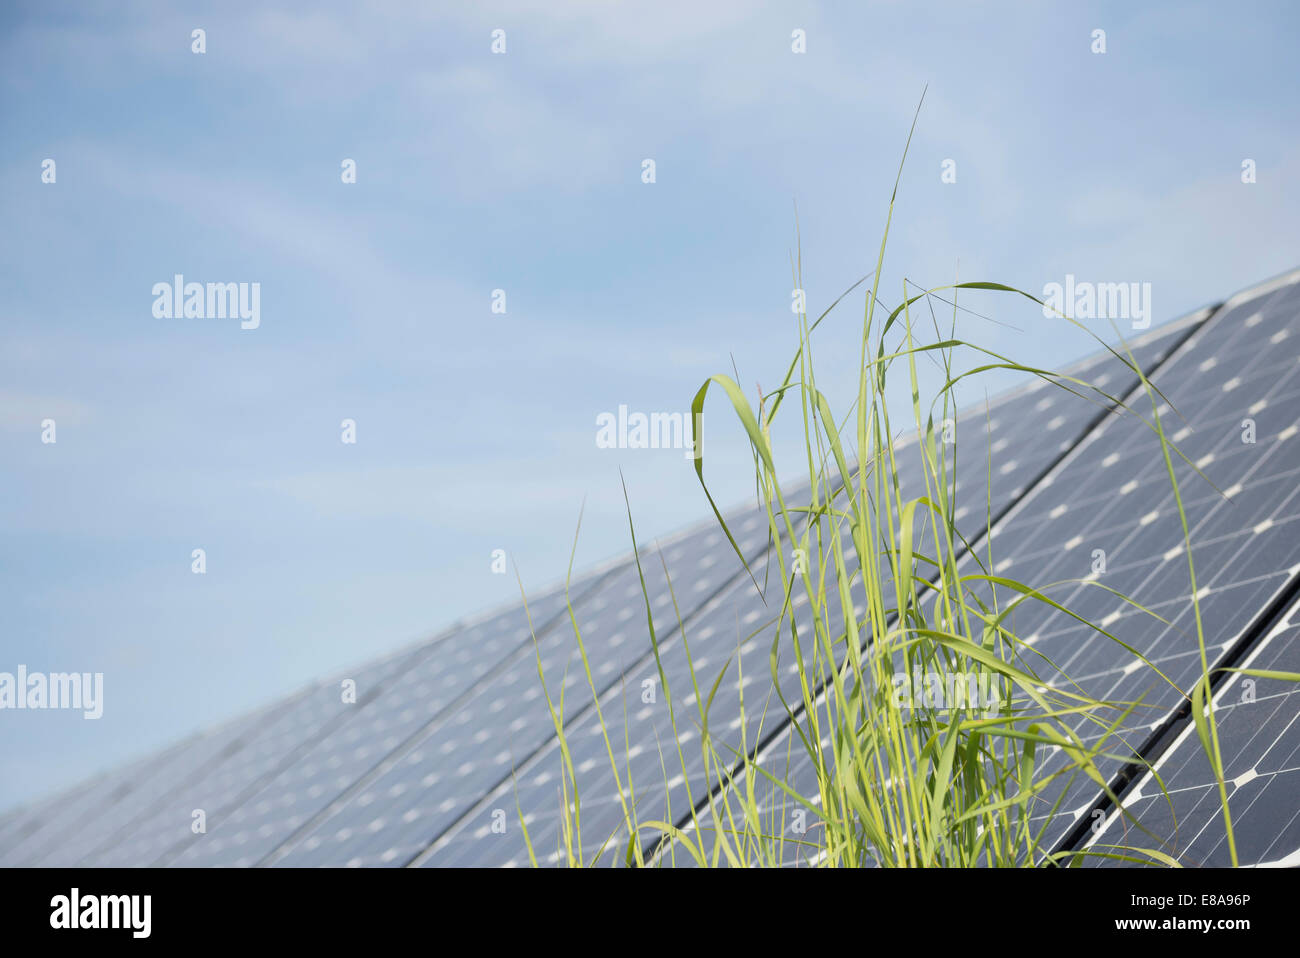 Blade of grass in front of solar panel Stock Photo